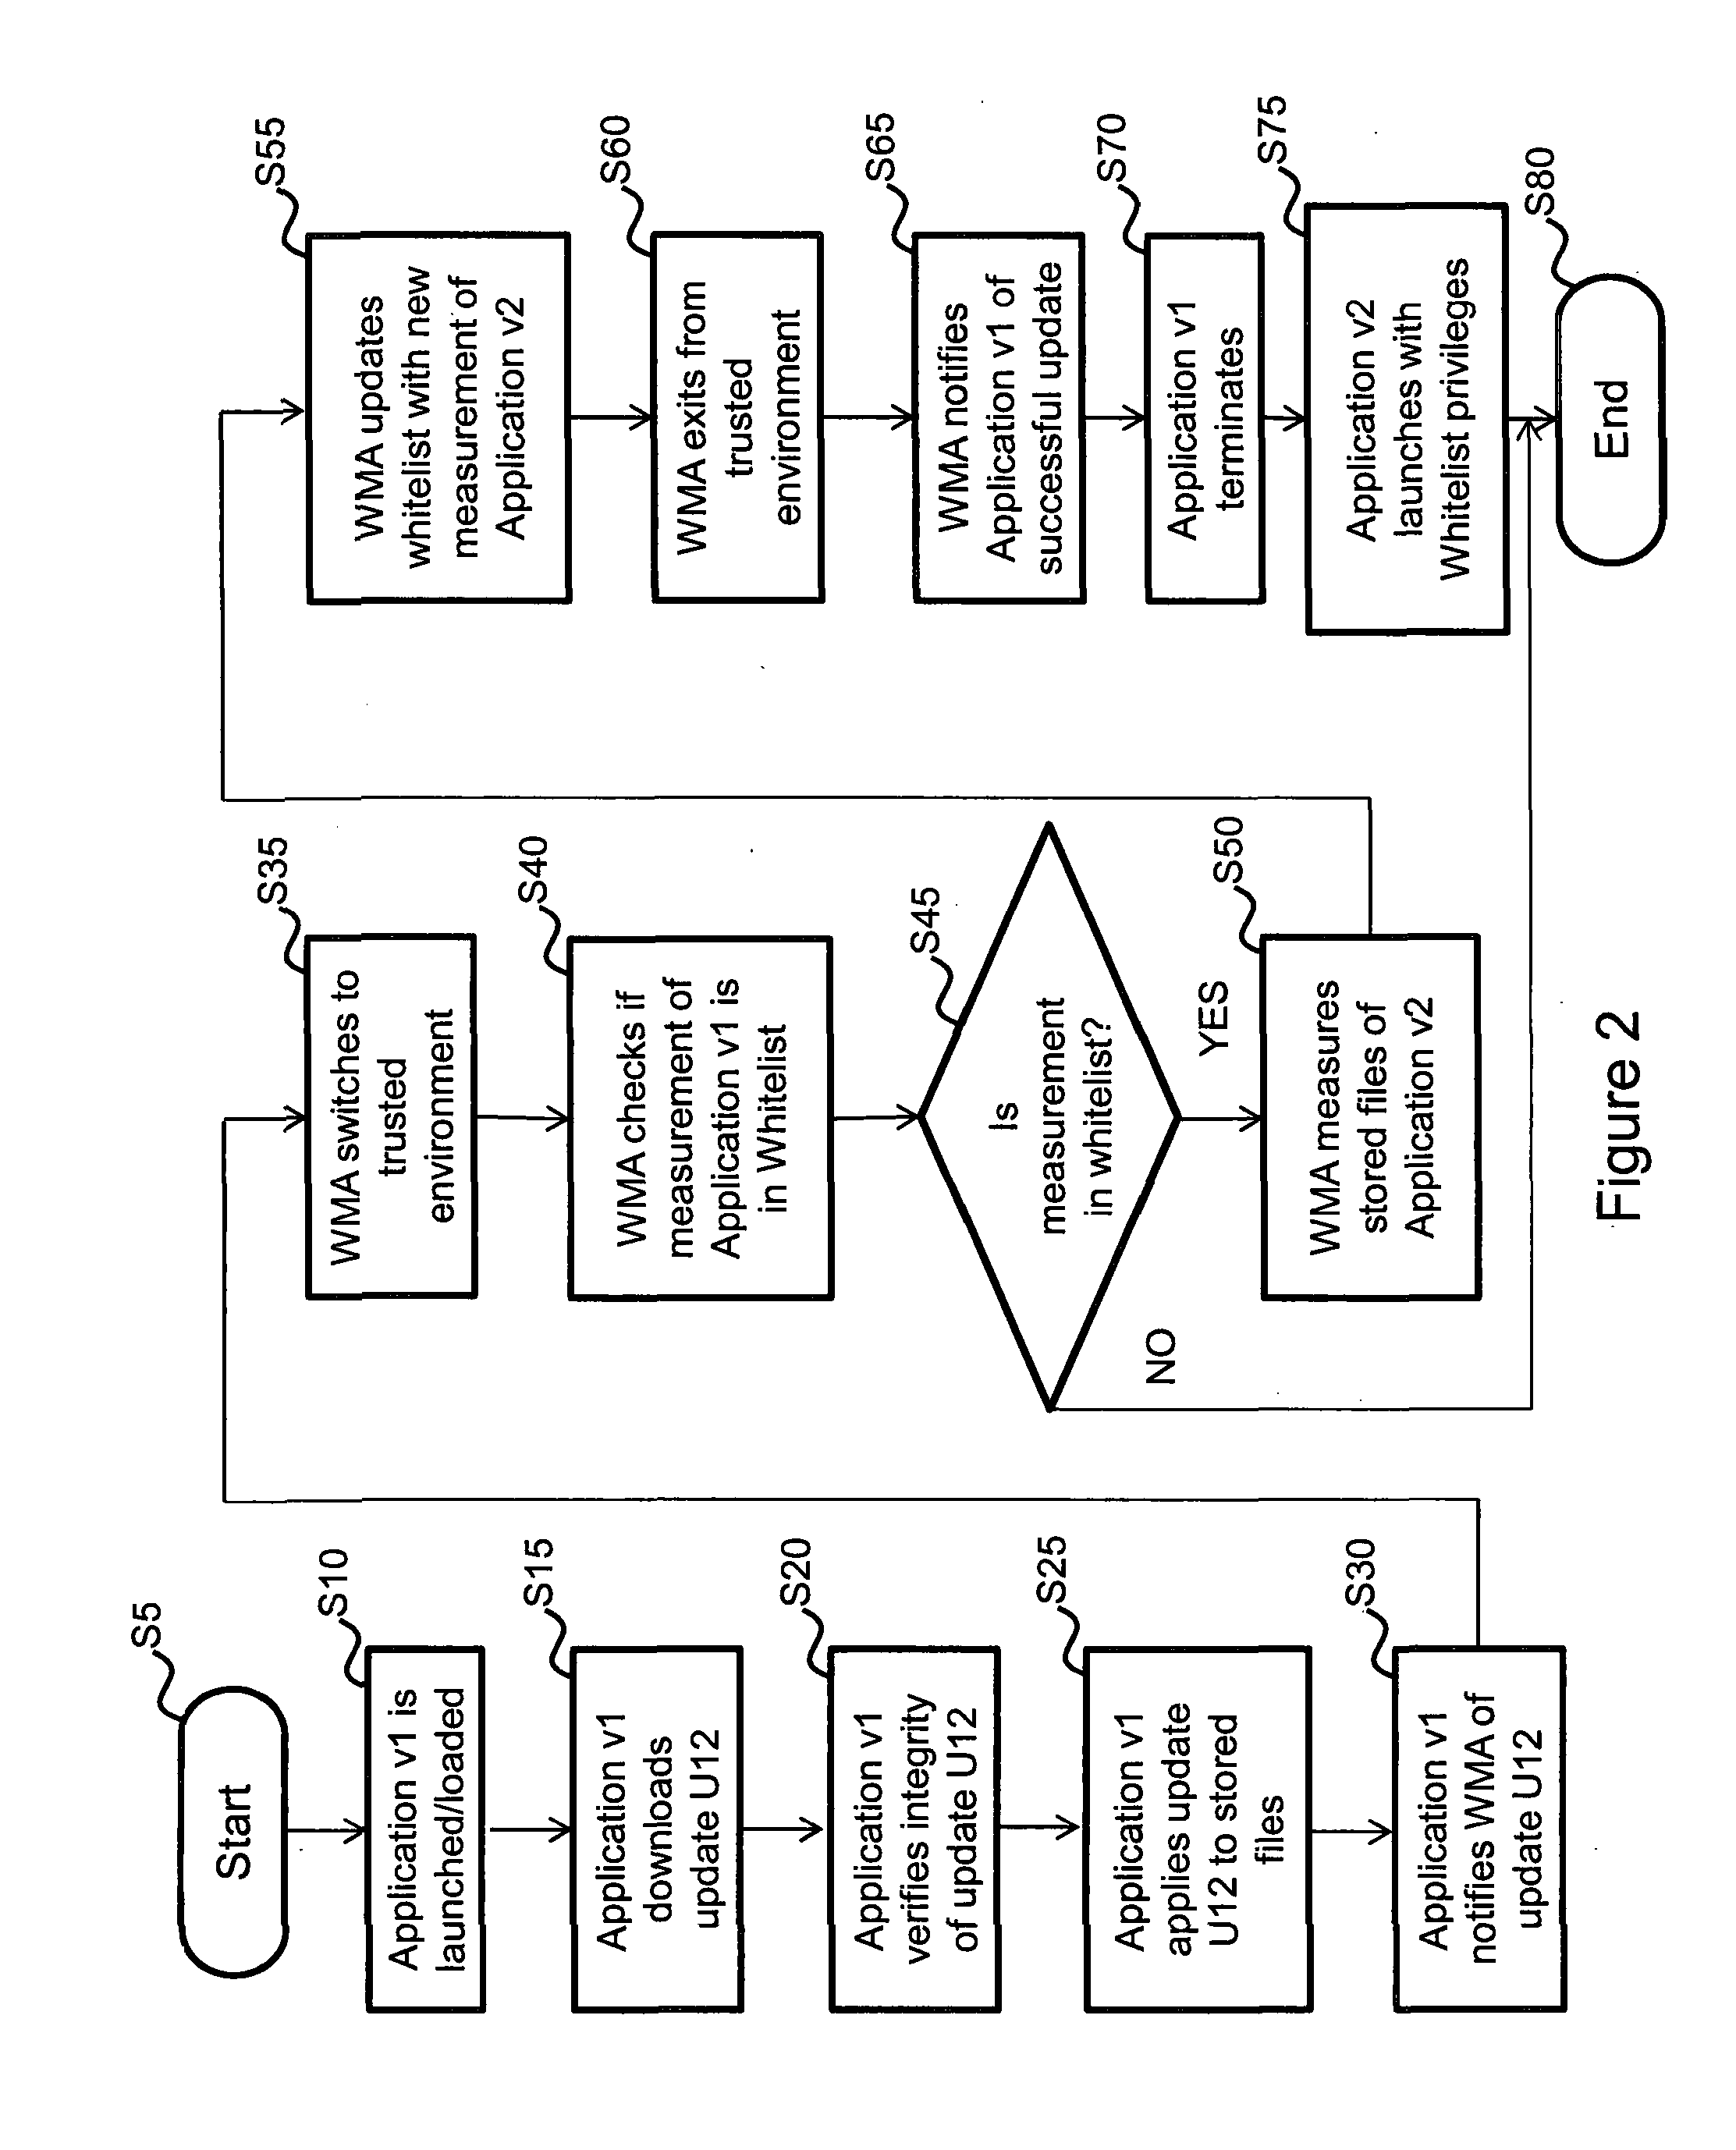 Method and apparatus for modifying a computer program in a trusted manner